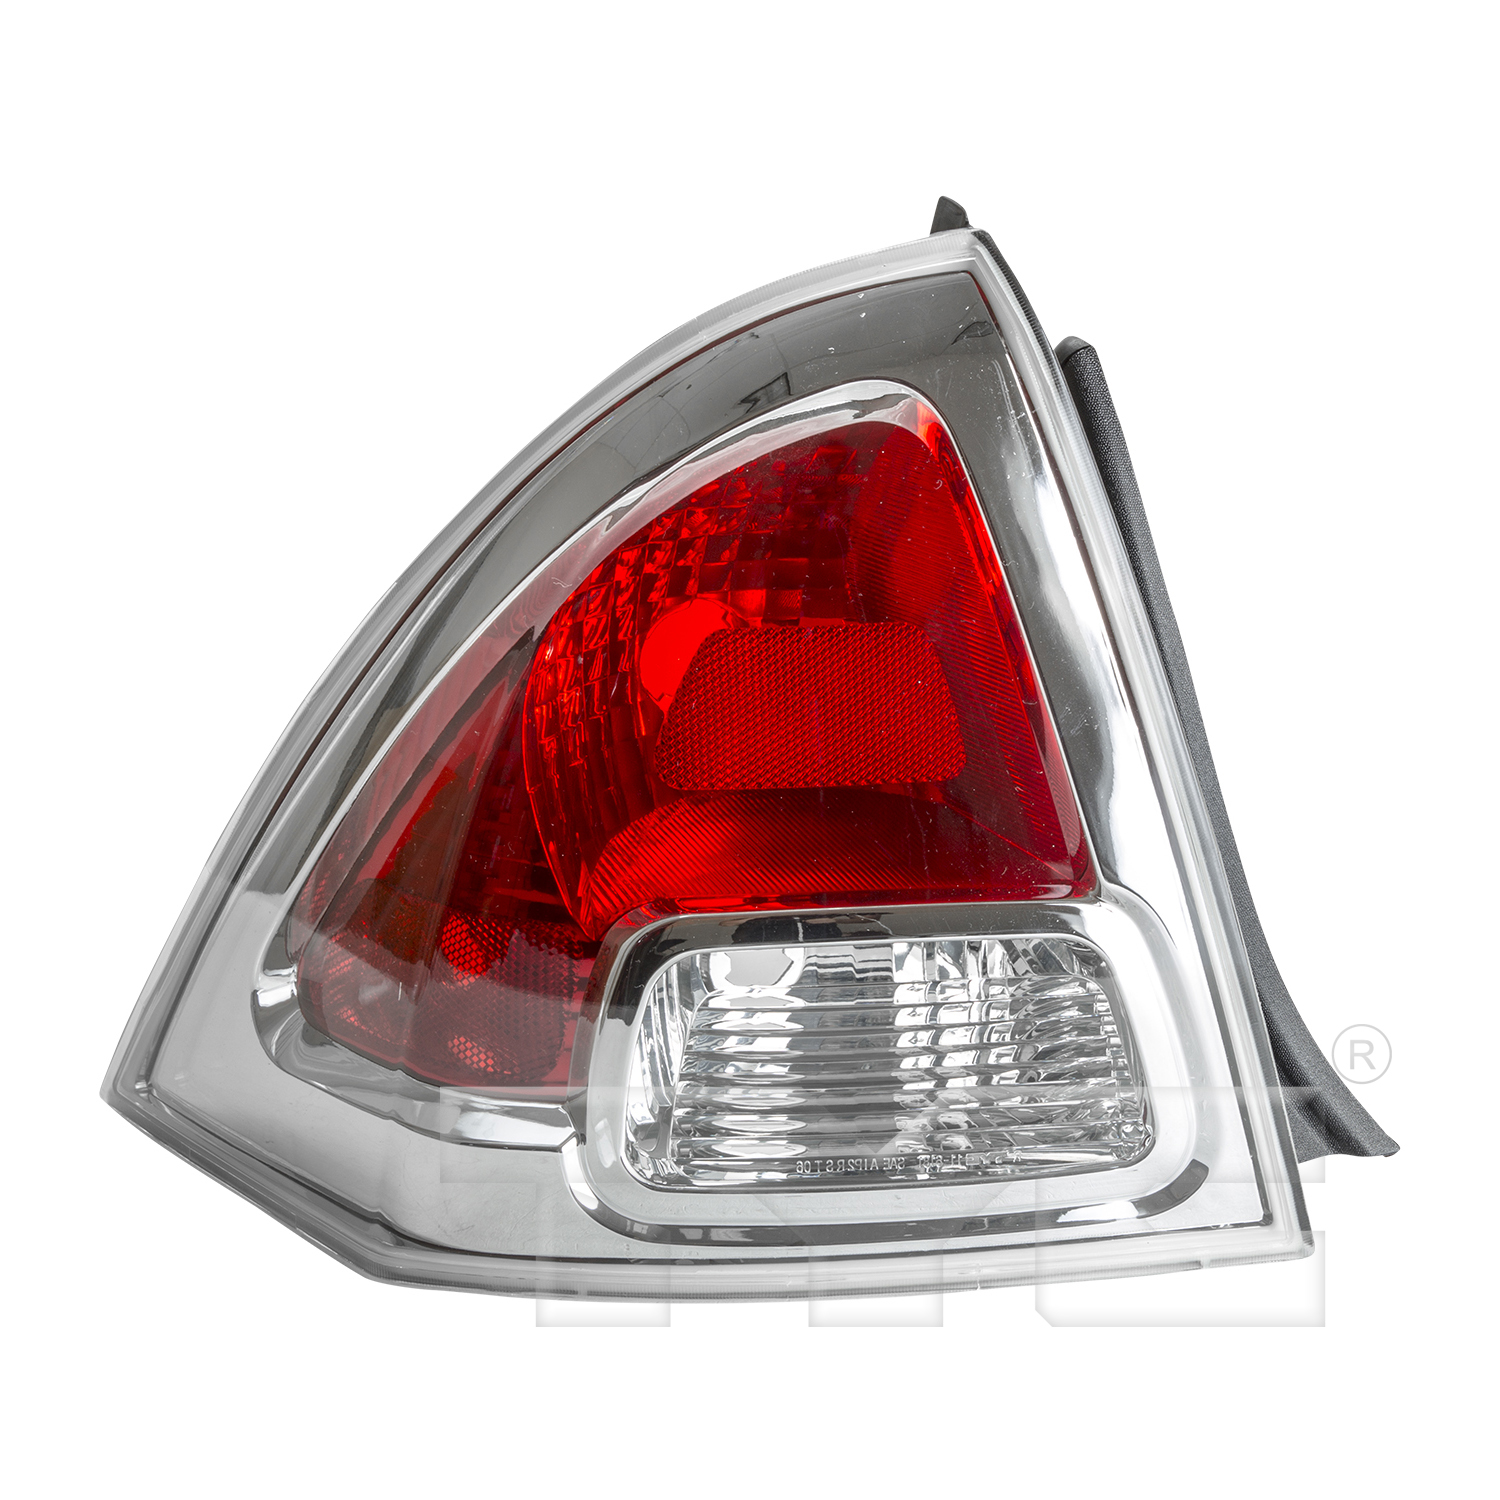 Aftermarket TAILLIGHTS for FORD - FUSION, FUSION,06-09,LT Taillamp lens/housing